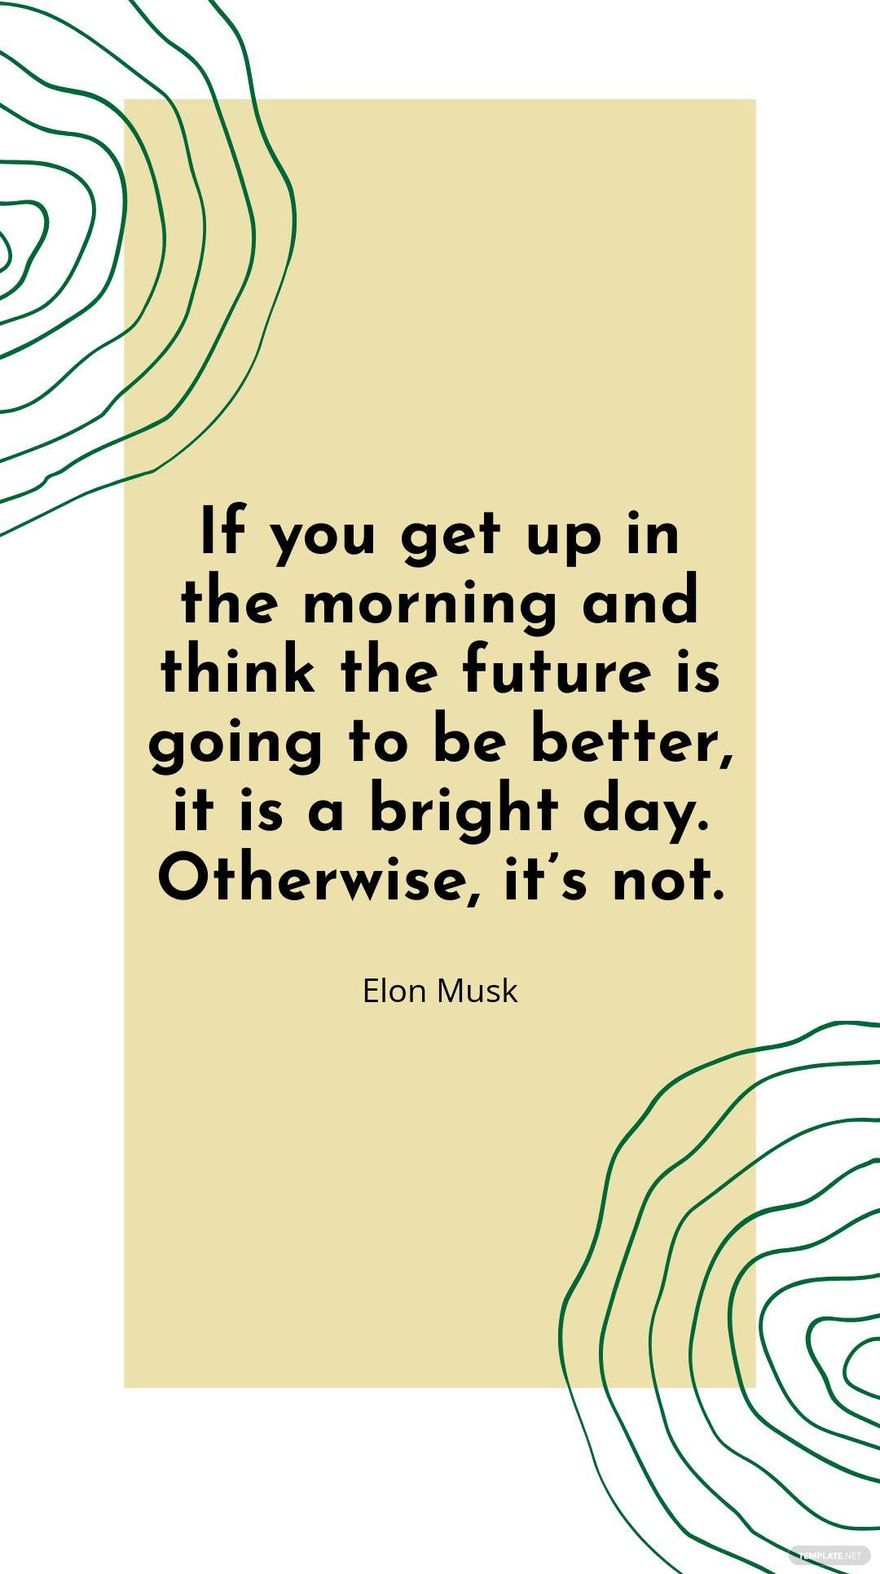 Elon Musk - If you get up in the morning and think the future is going to be better, it is a bright day. Otherwise, it’s not.